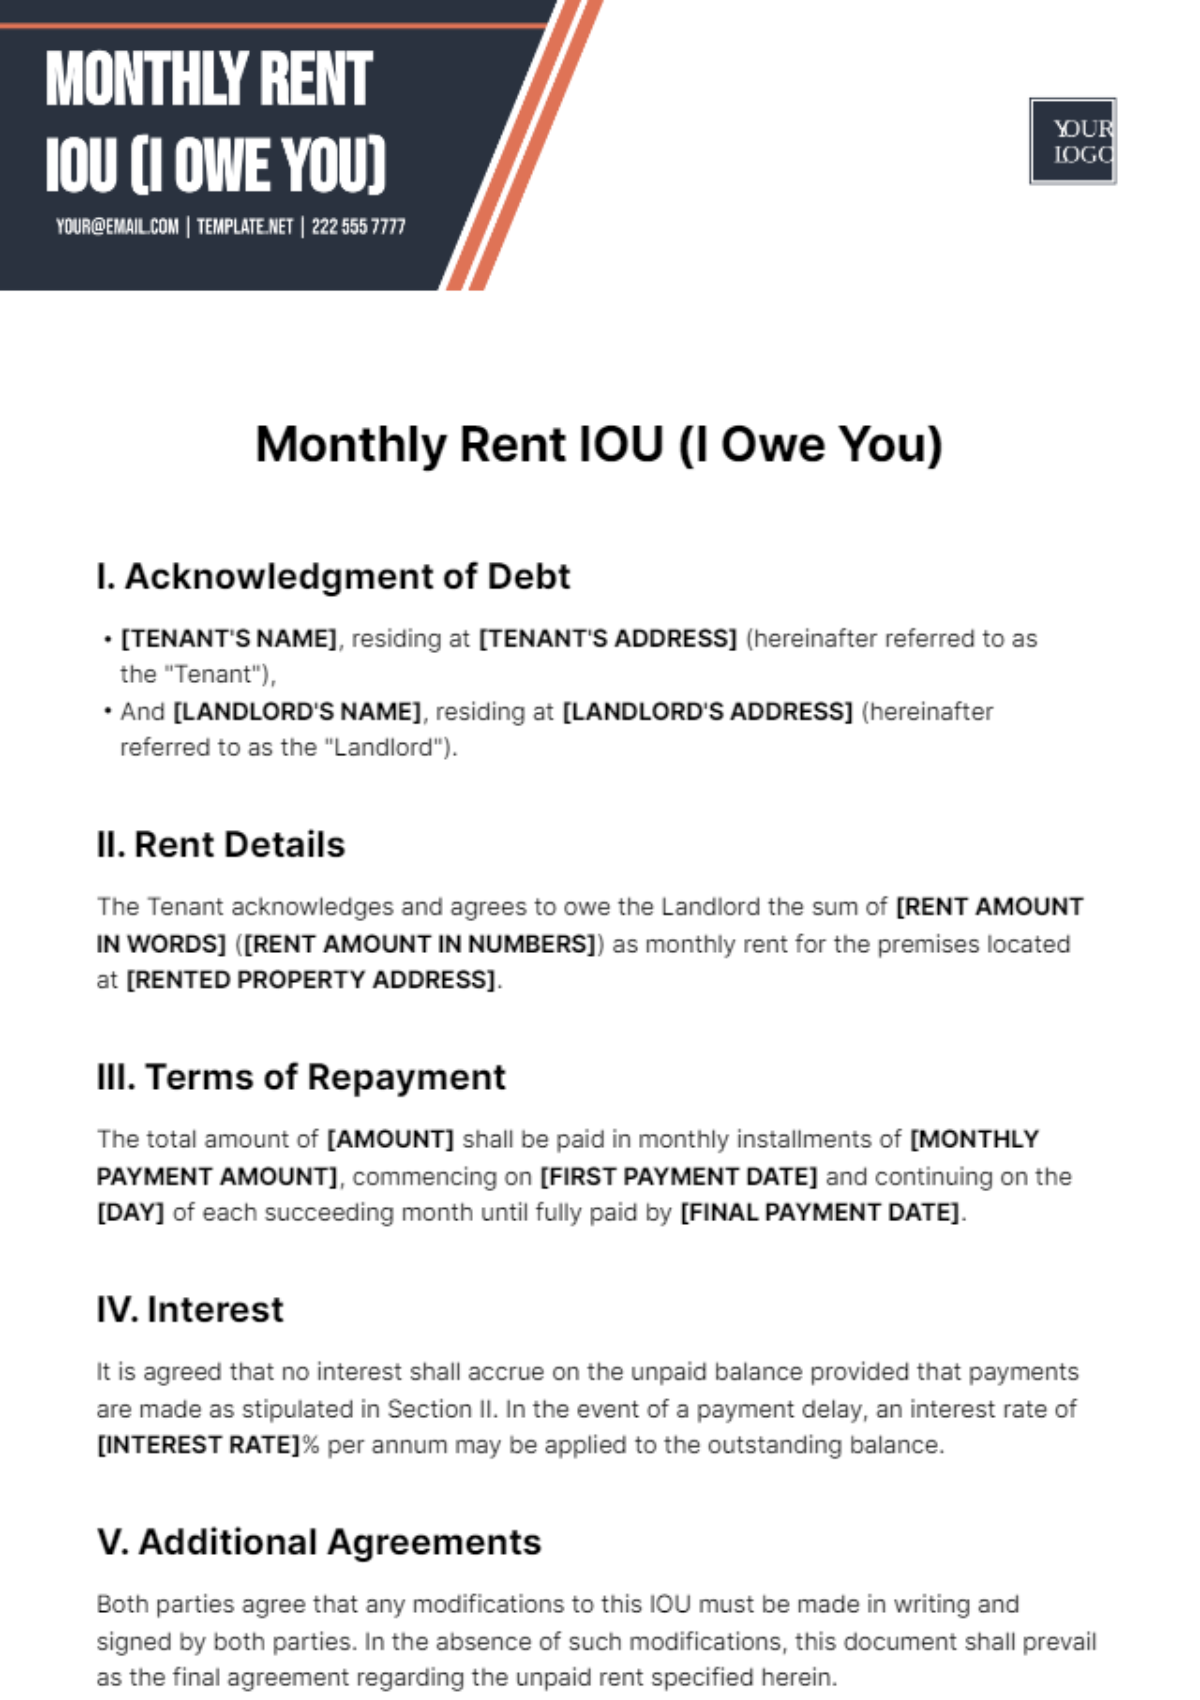 Monthly Rent IOU Template